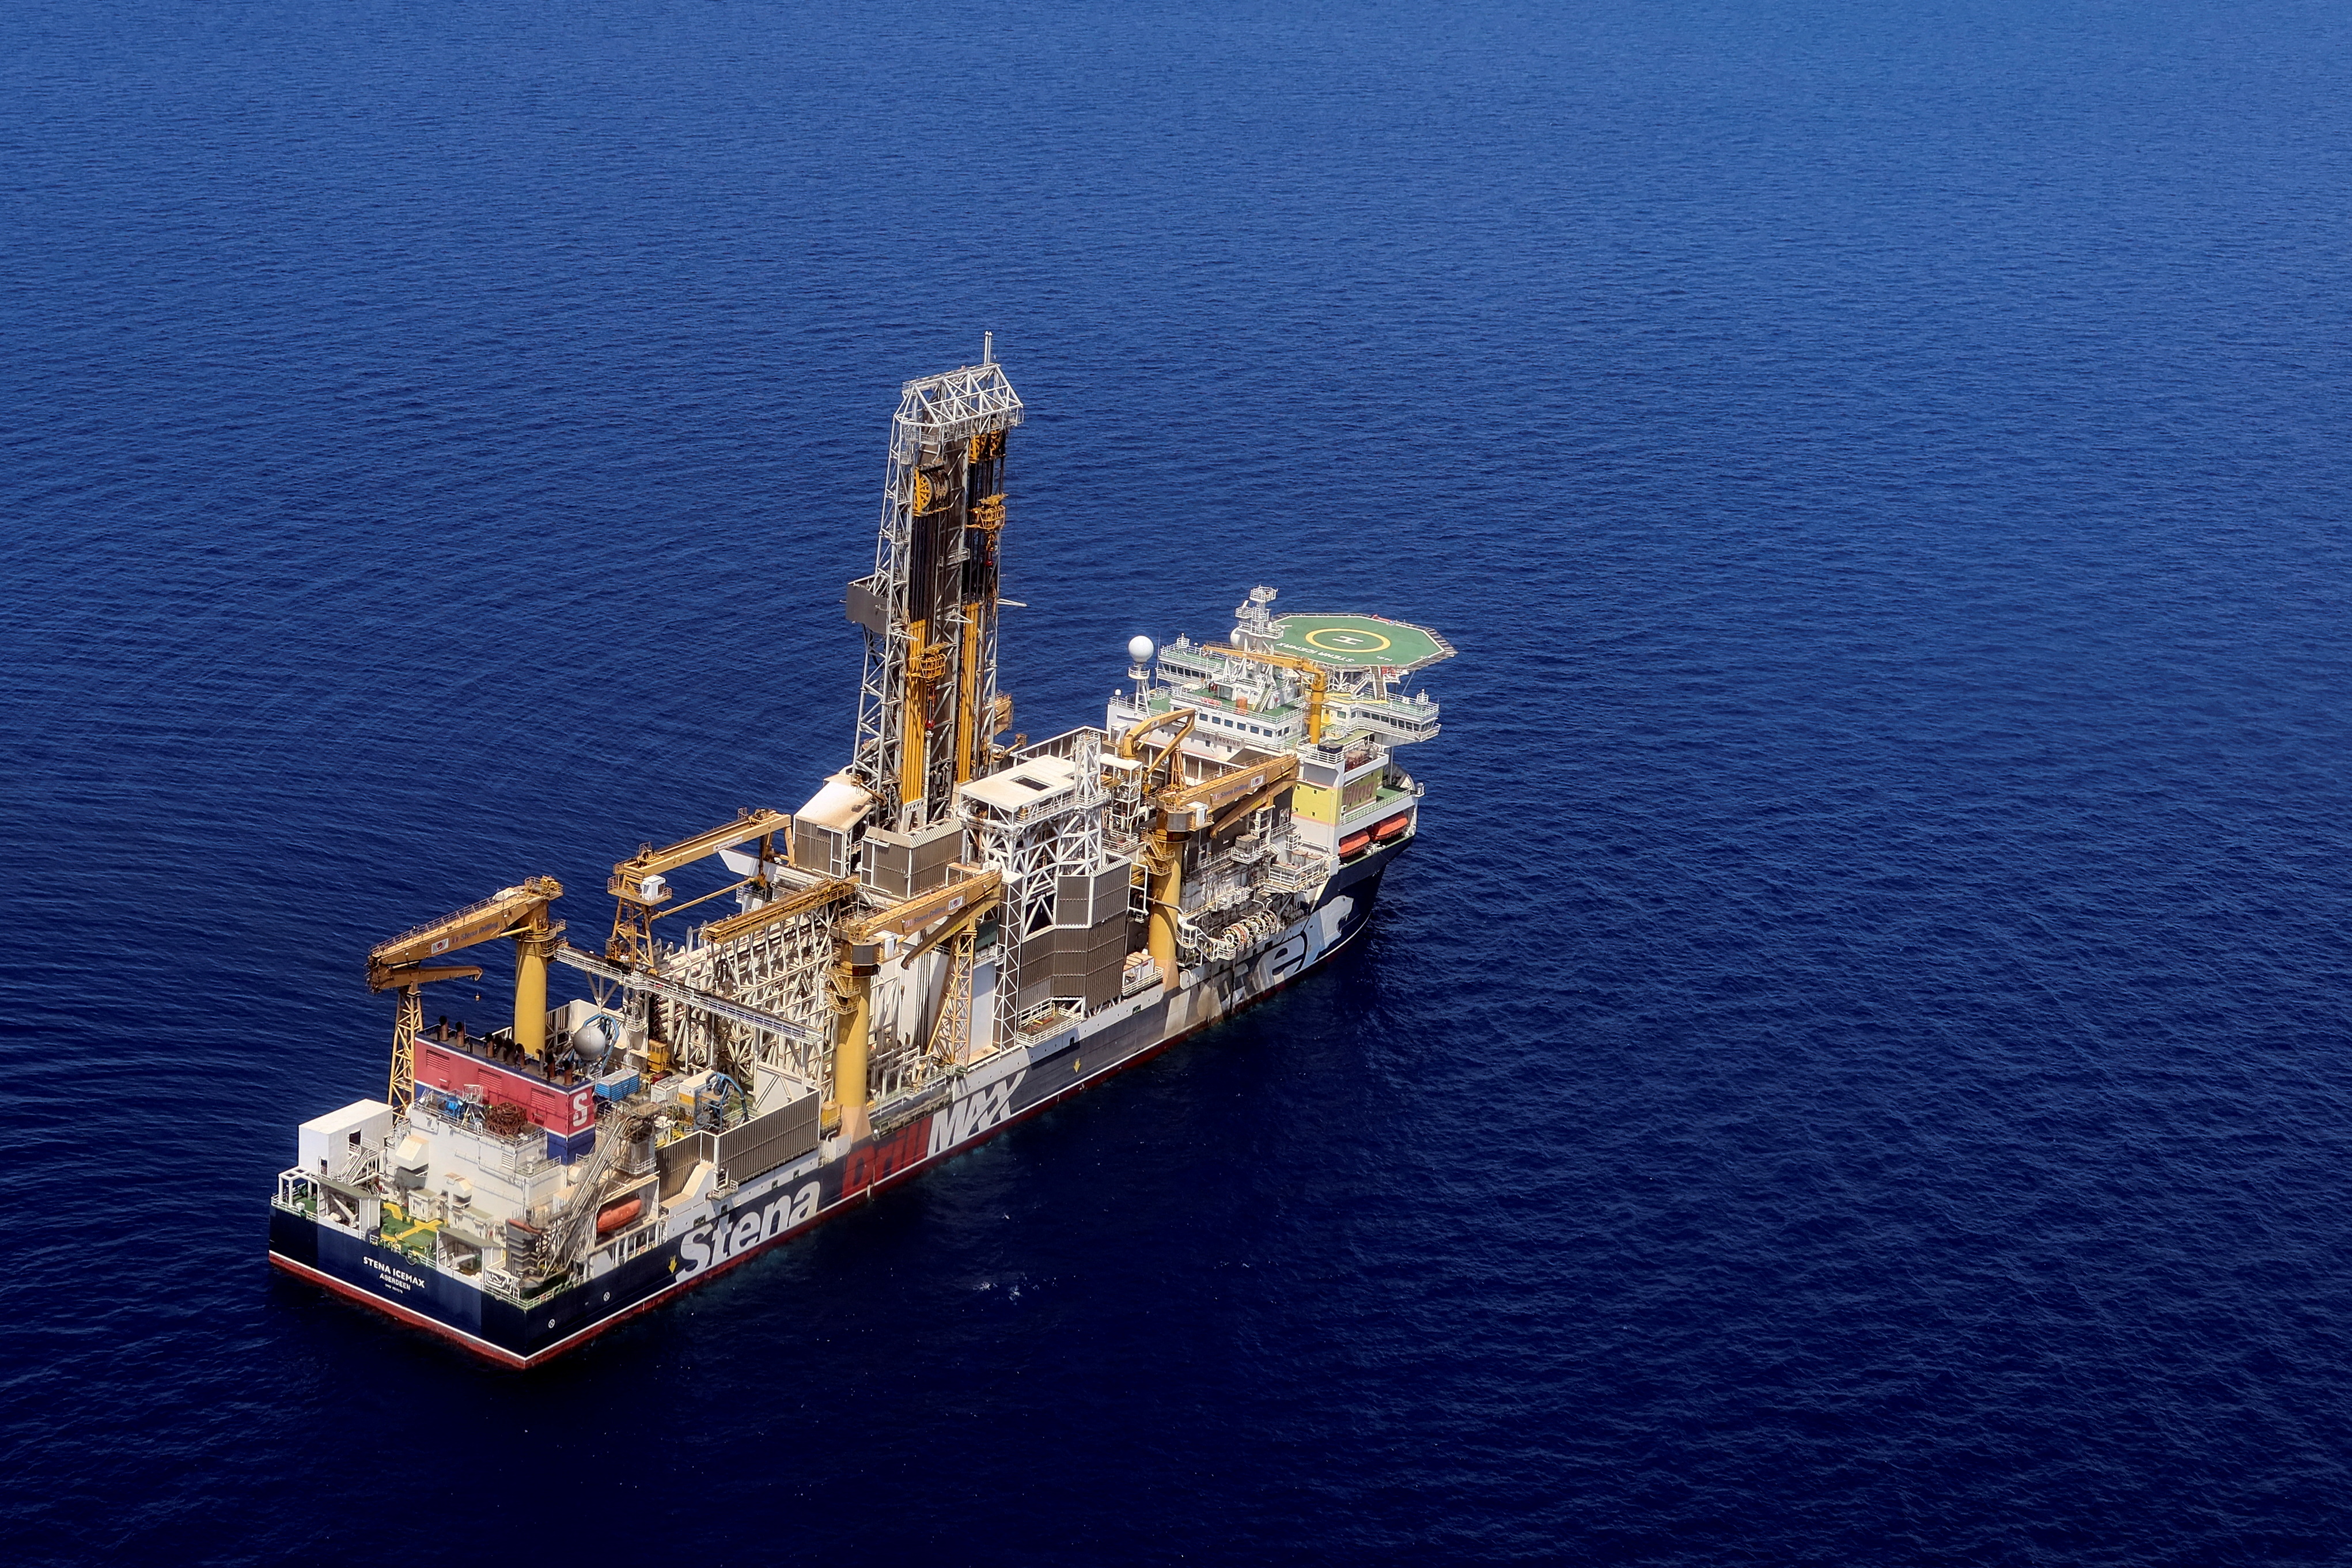 London-based Energean's drill ship begins drilling at the Karish natural gas field offshore Israel in the east Mediterranean